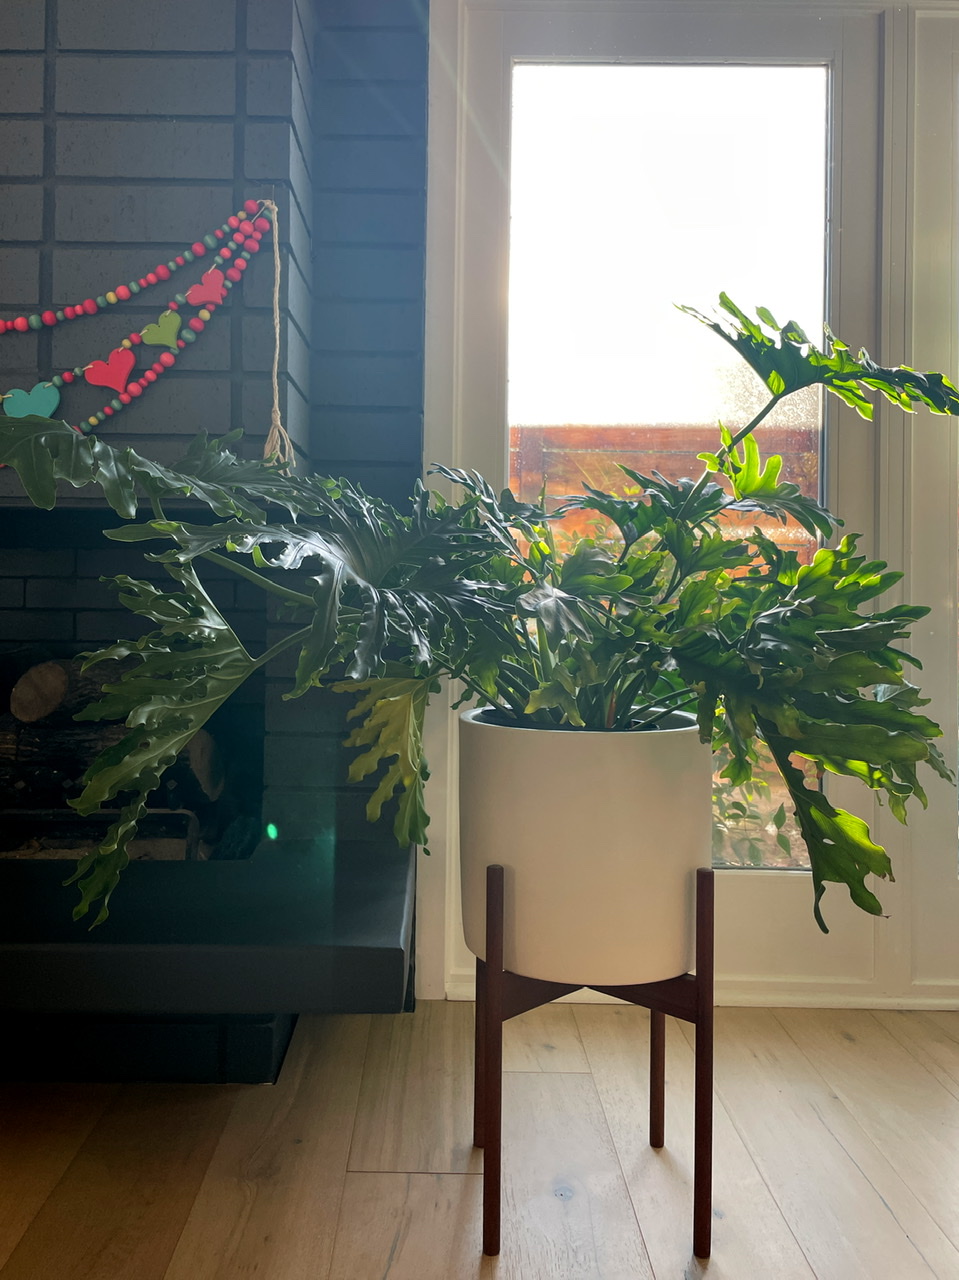 848178EA C740 427A 9259 854E472BCBF8 - Introducing Indoor Digs - Hope Philodendron